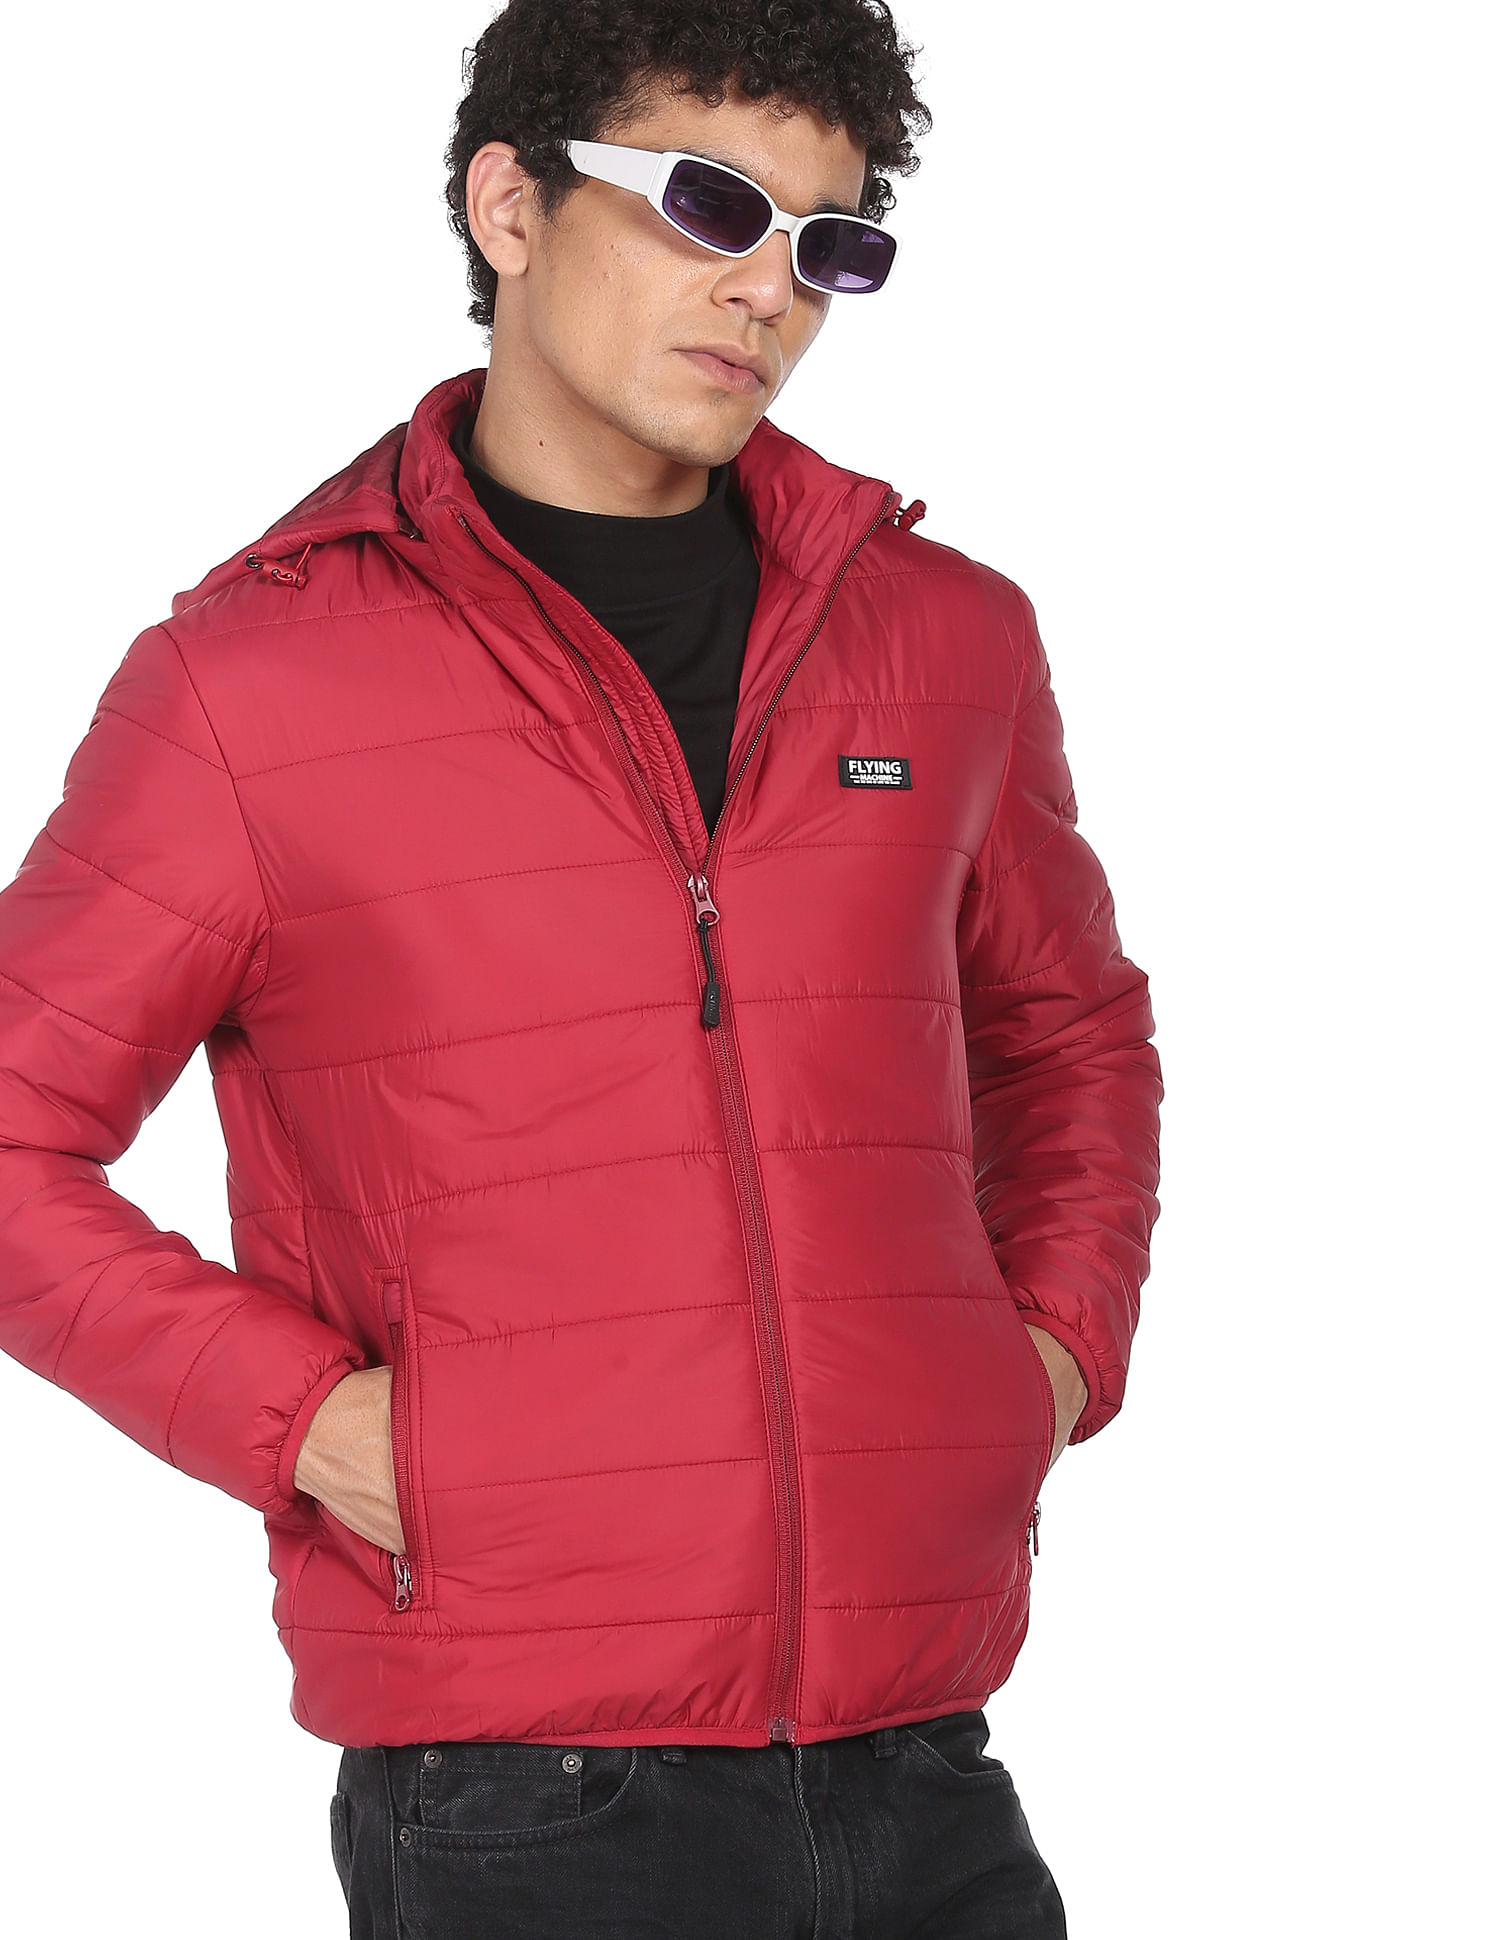 Hooded Down Padded Jacket, Red